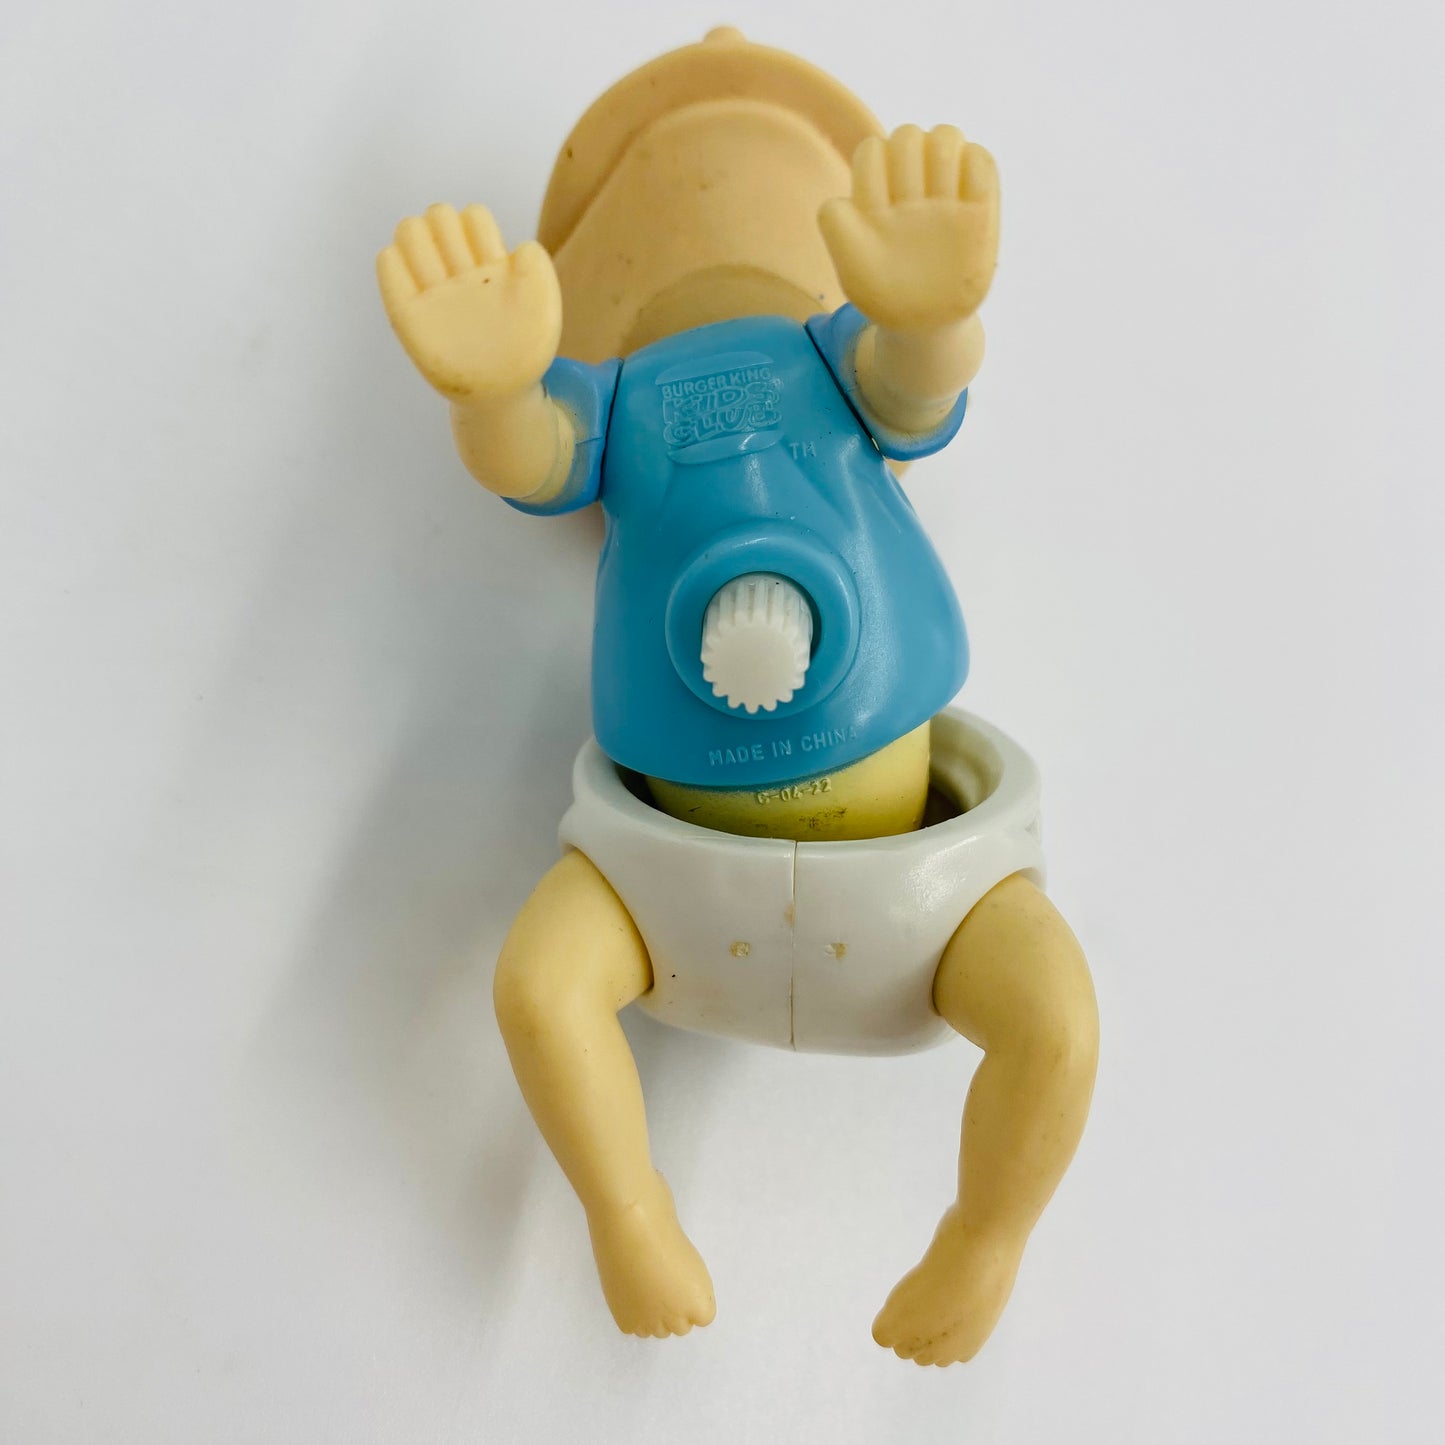 The Rugrats Movie Hero on the Move Tommy wind up Burger King Kids' Meals toy (1998) loose